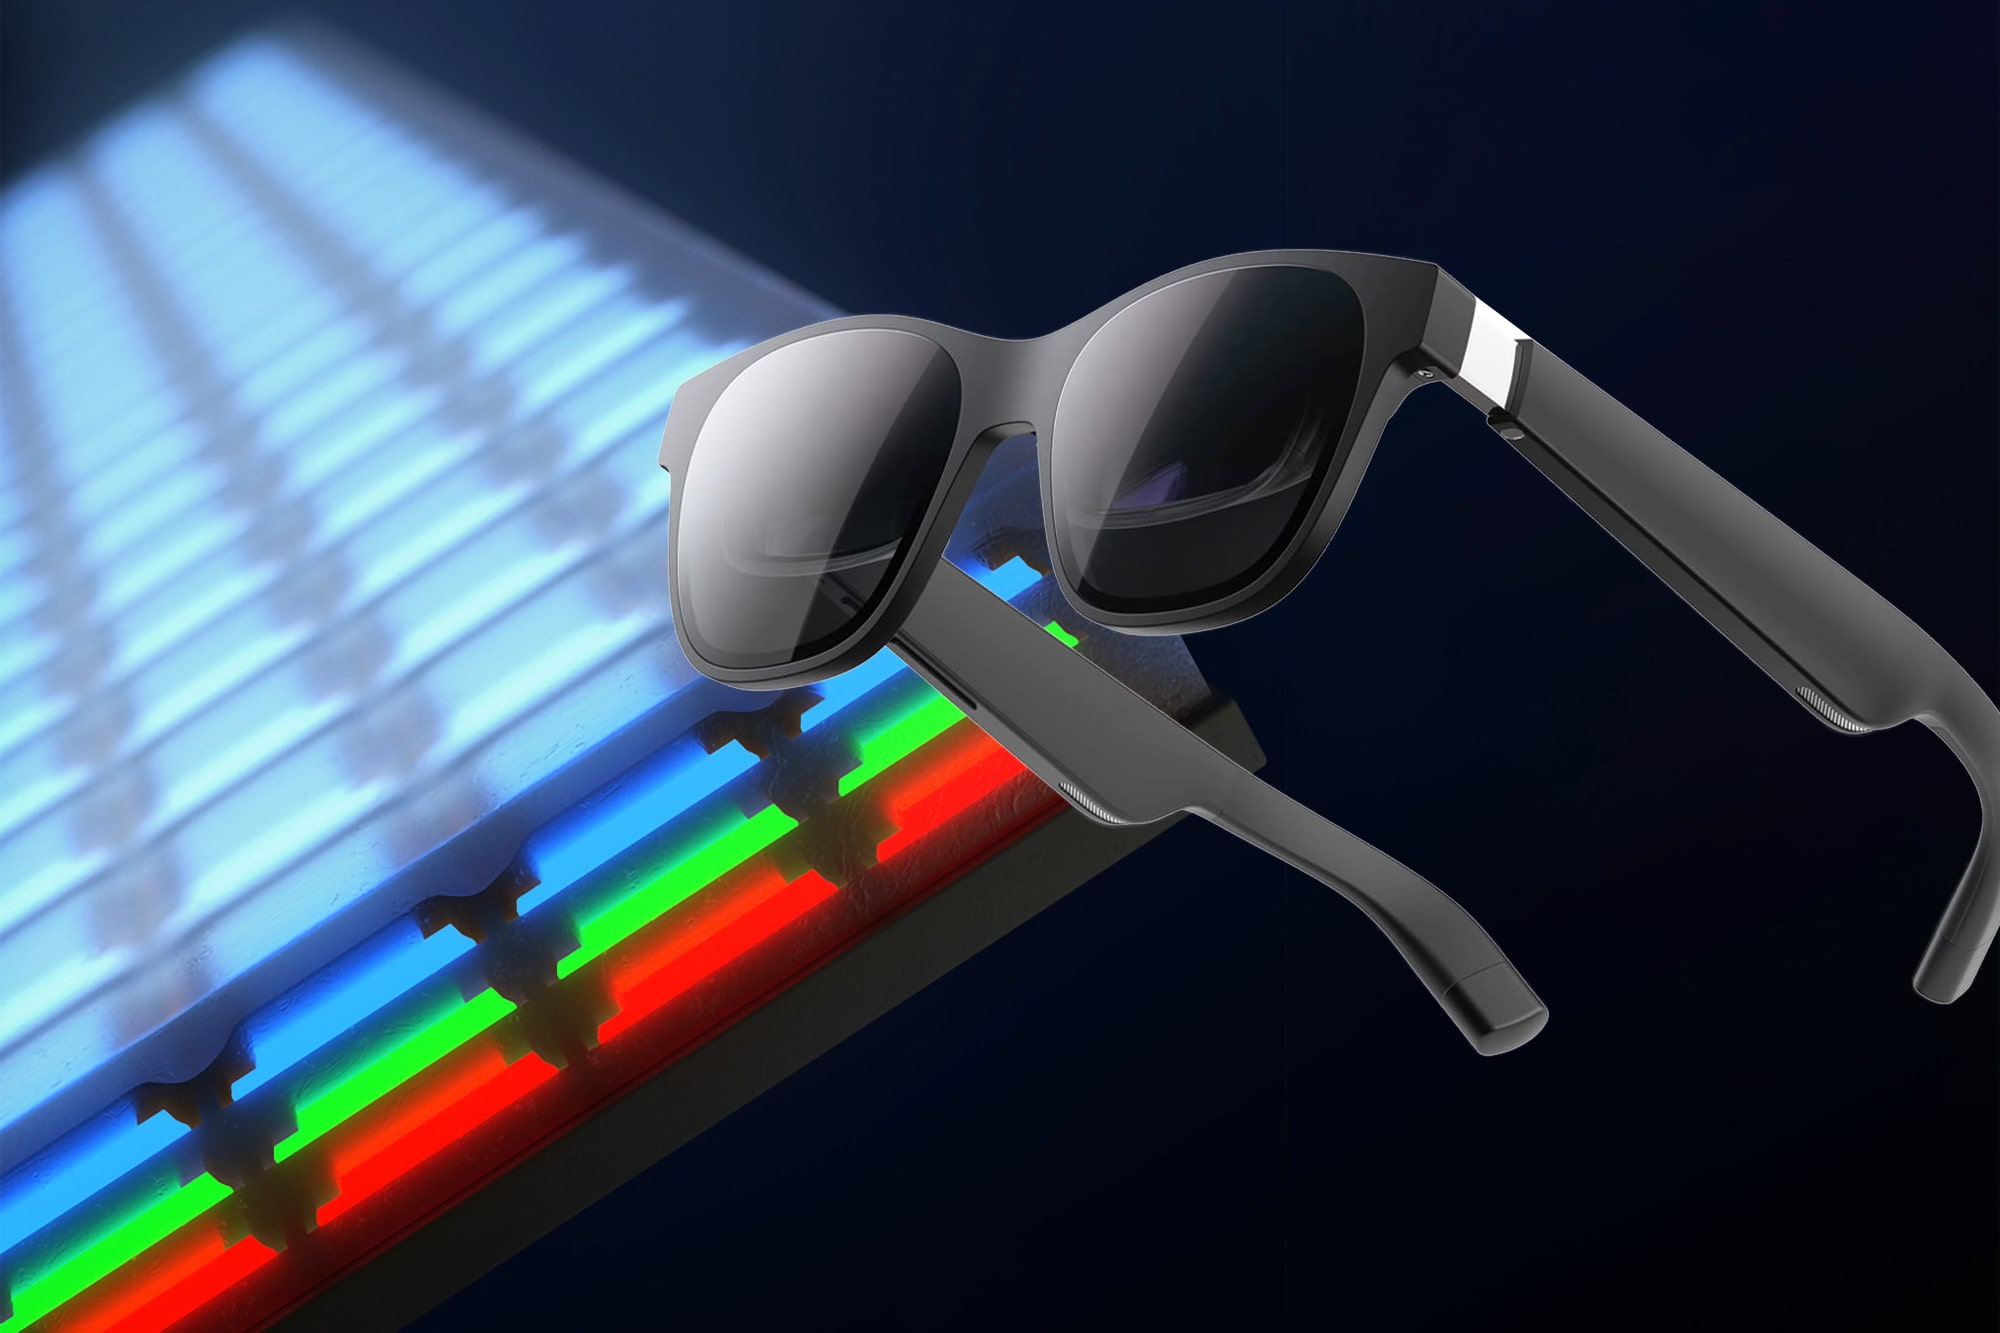 AR Glasses appear over an enlarged view of a stacked microLED display.